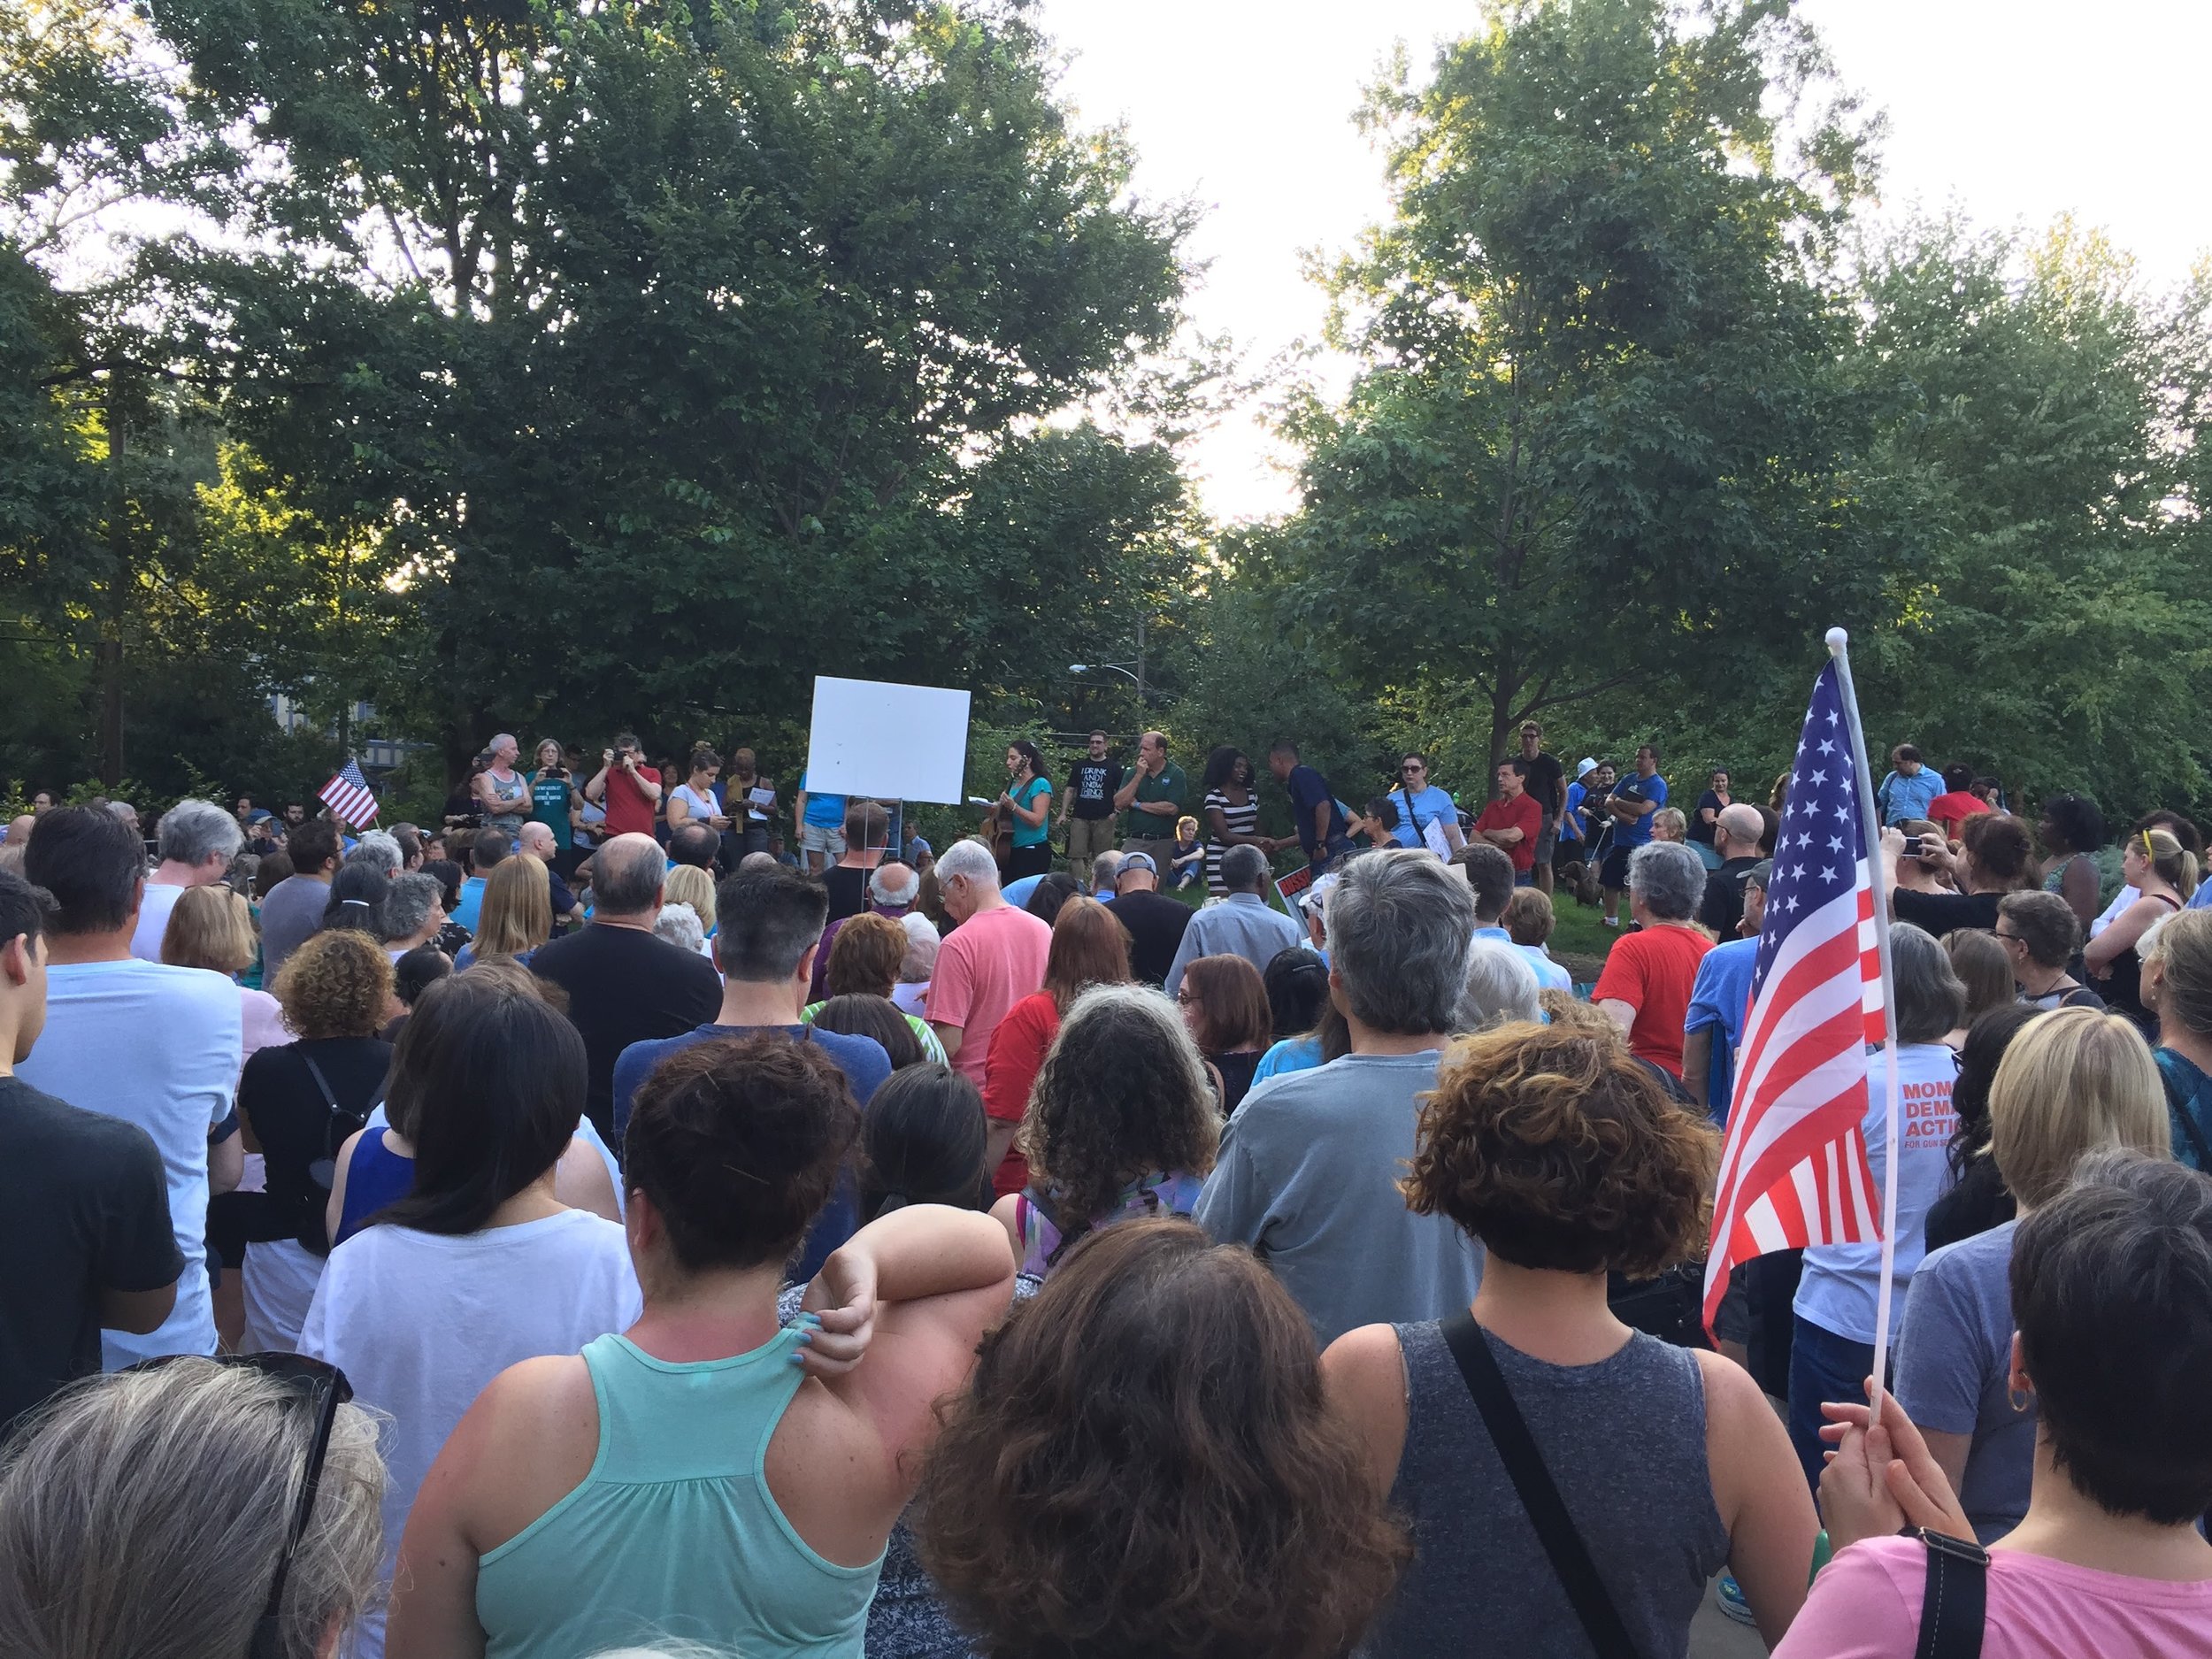  After a white supremacist protest turned violent in August 2017, H-CAN members came out to support a local Stand Up for Love event on August 13, 2017. 